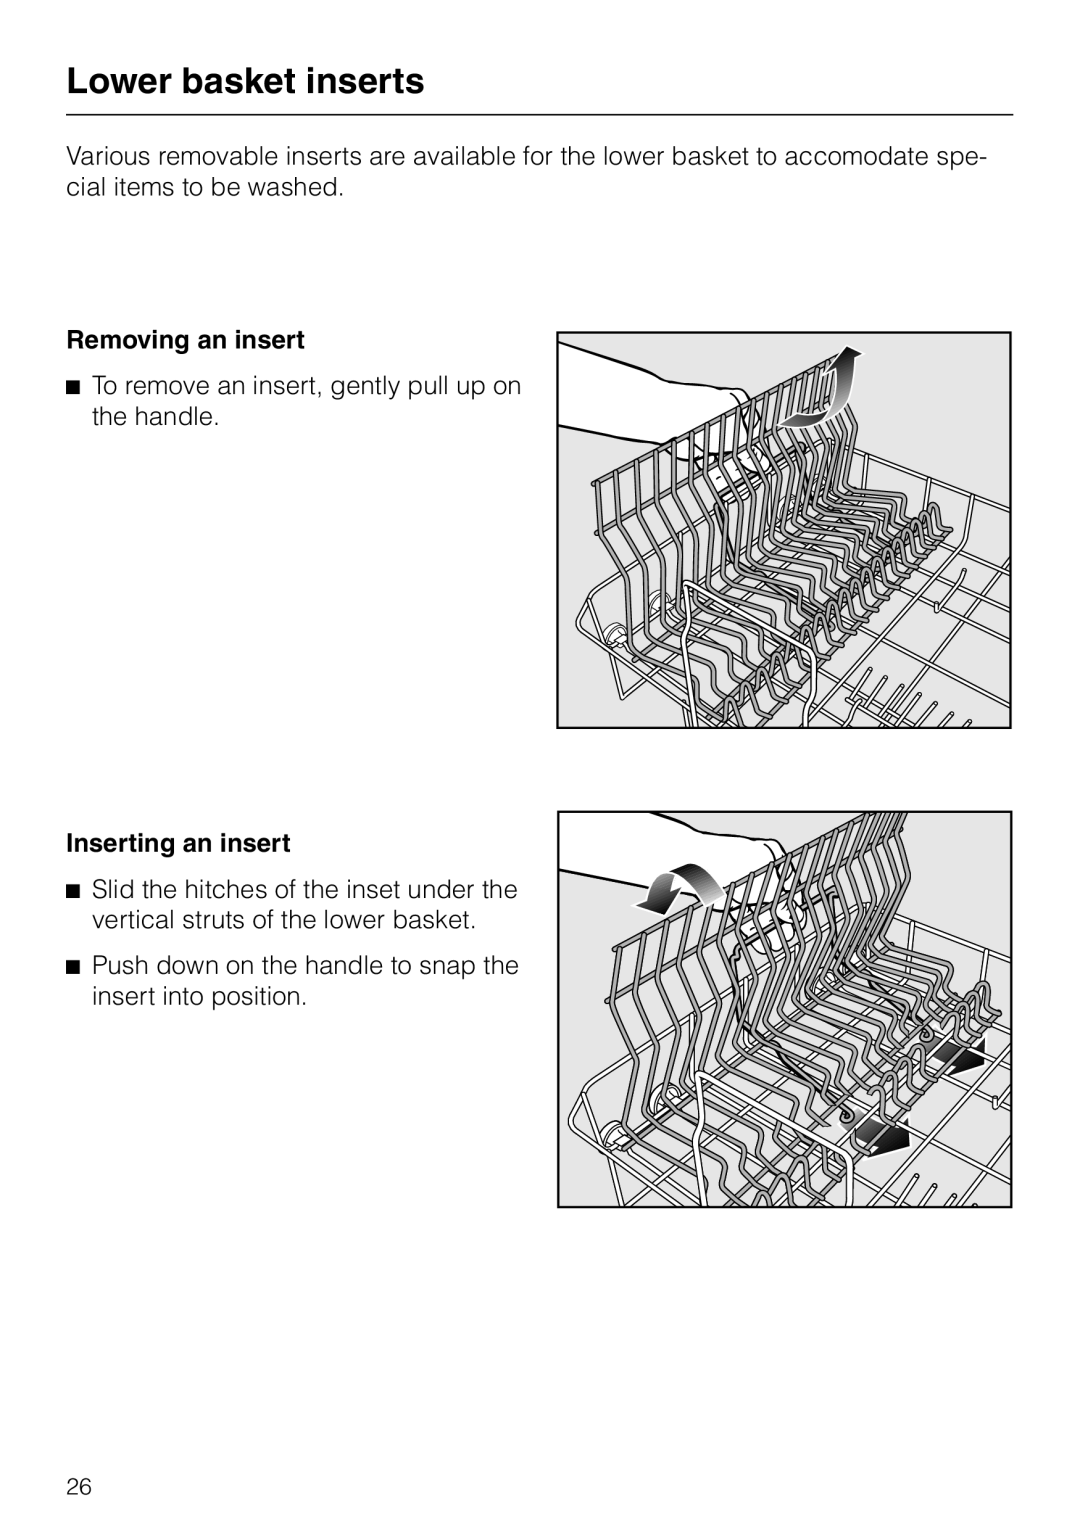 Miele G 851 operating instructions Lower basket inserts, Removing an insert, Inserting an insert 